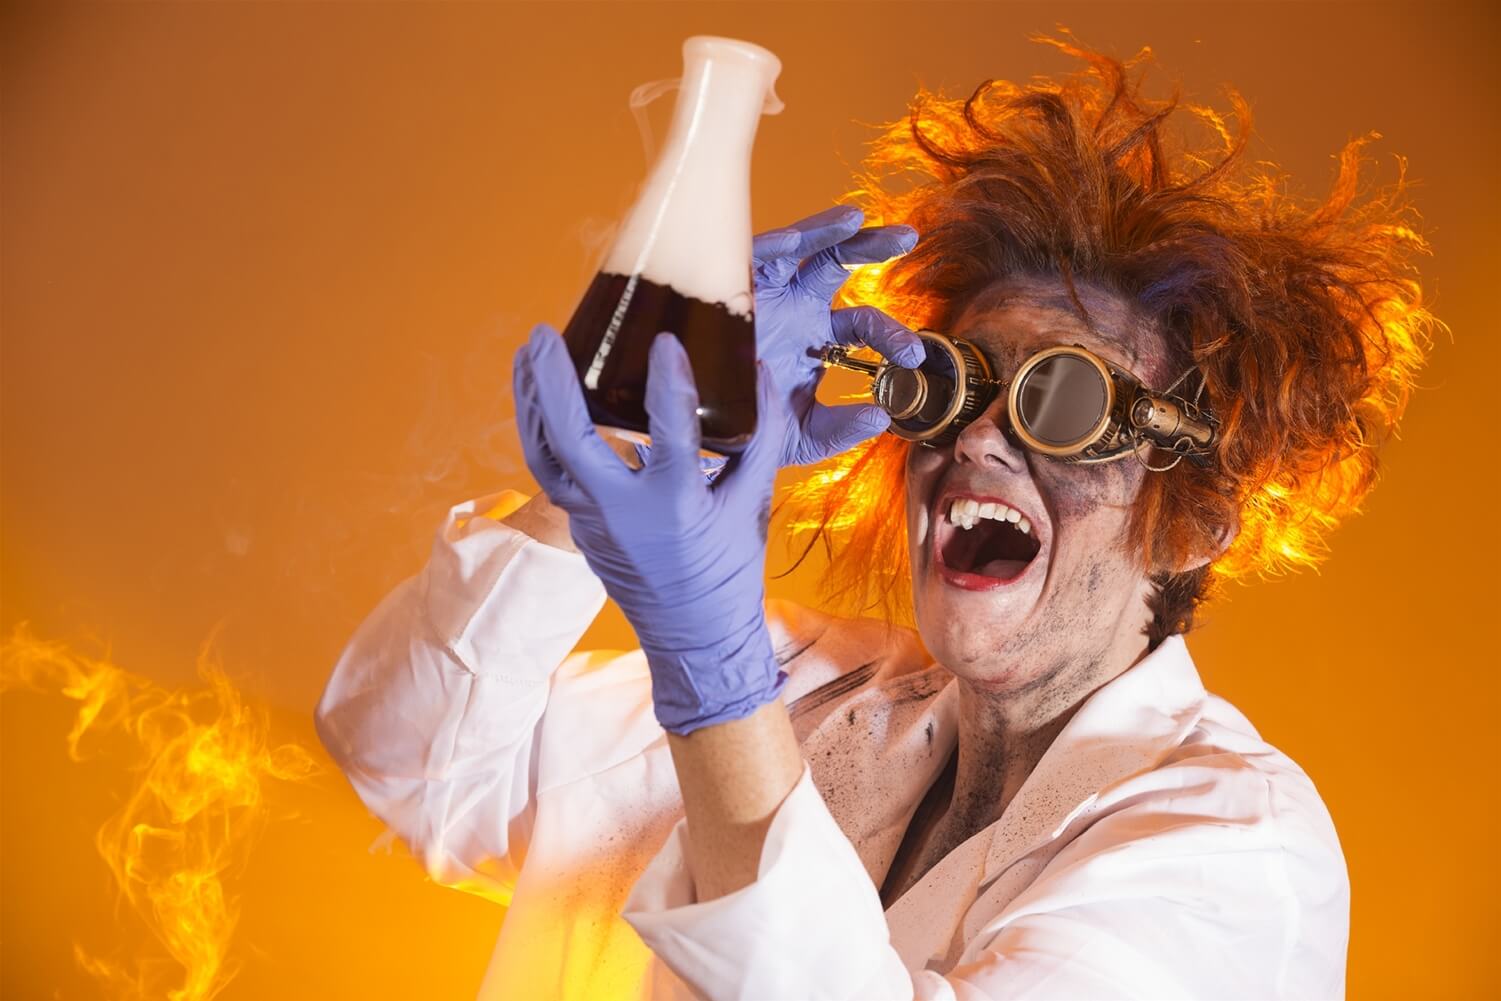 The Top Ten Things Scientists Think about on Halloween